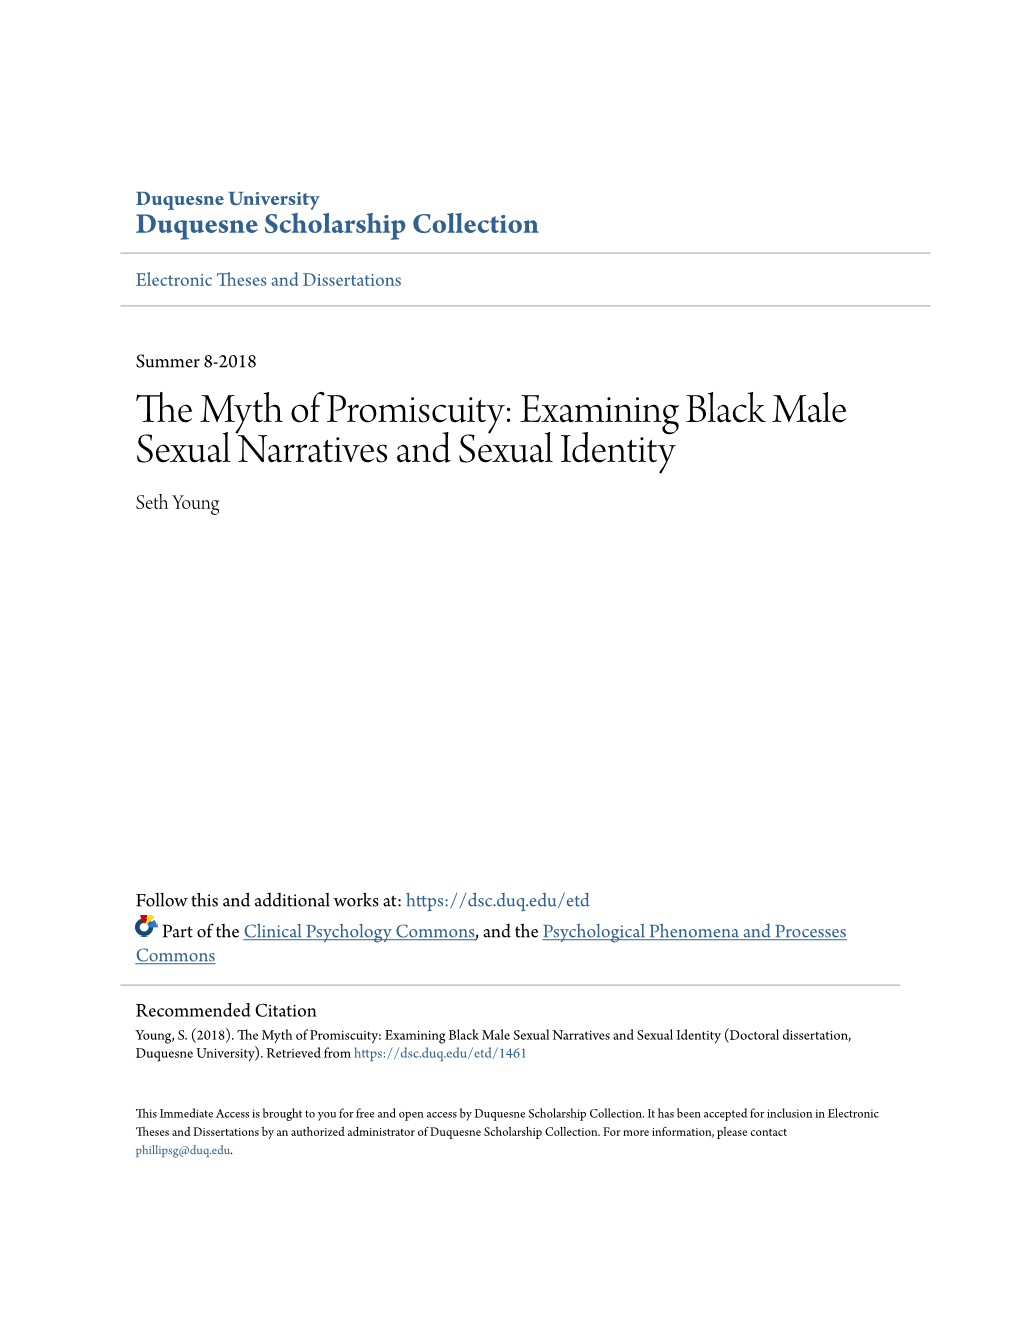 The Myth of Promiscuity: Examining Black Male Sexual Narratives And